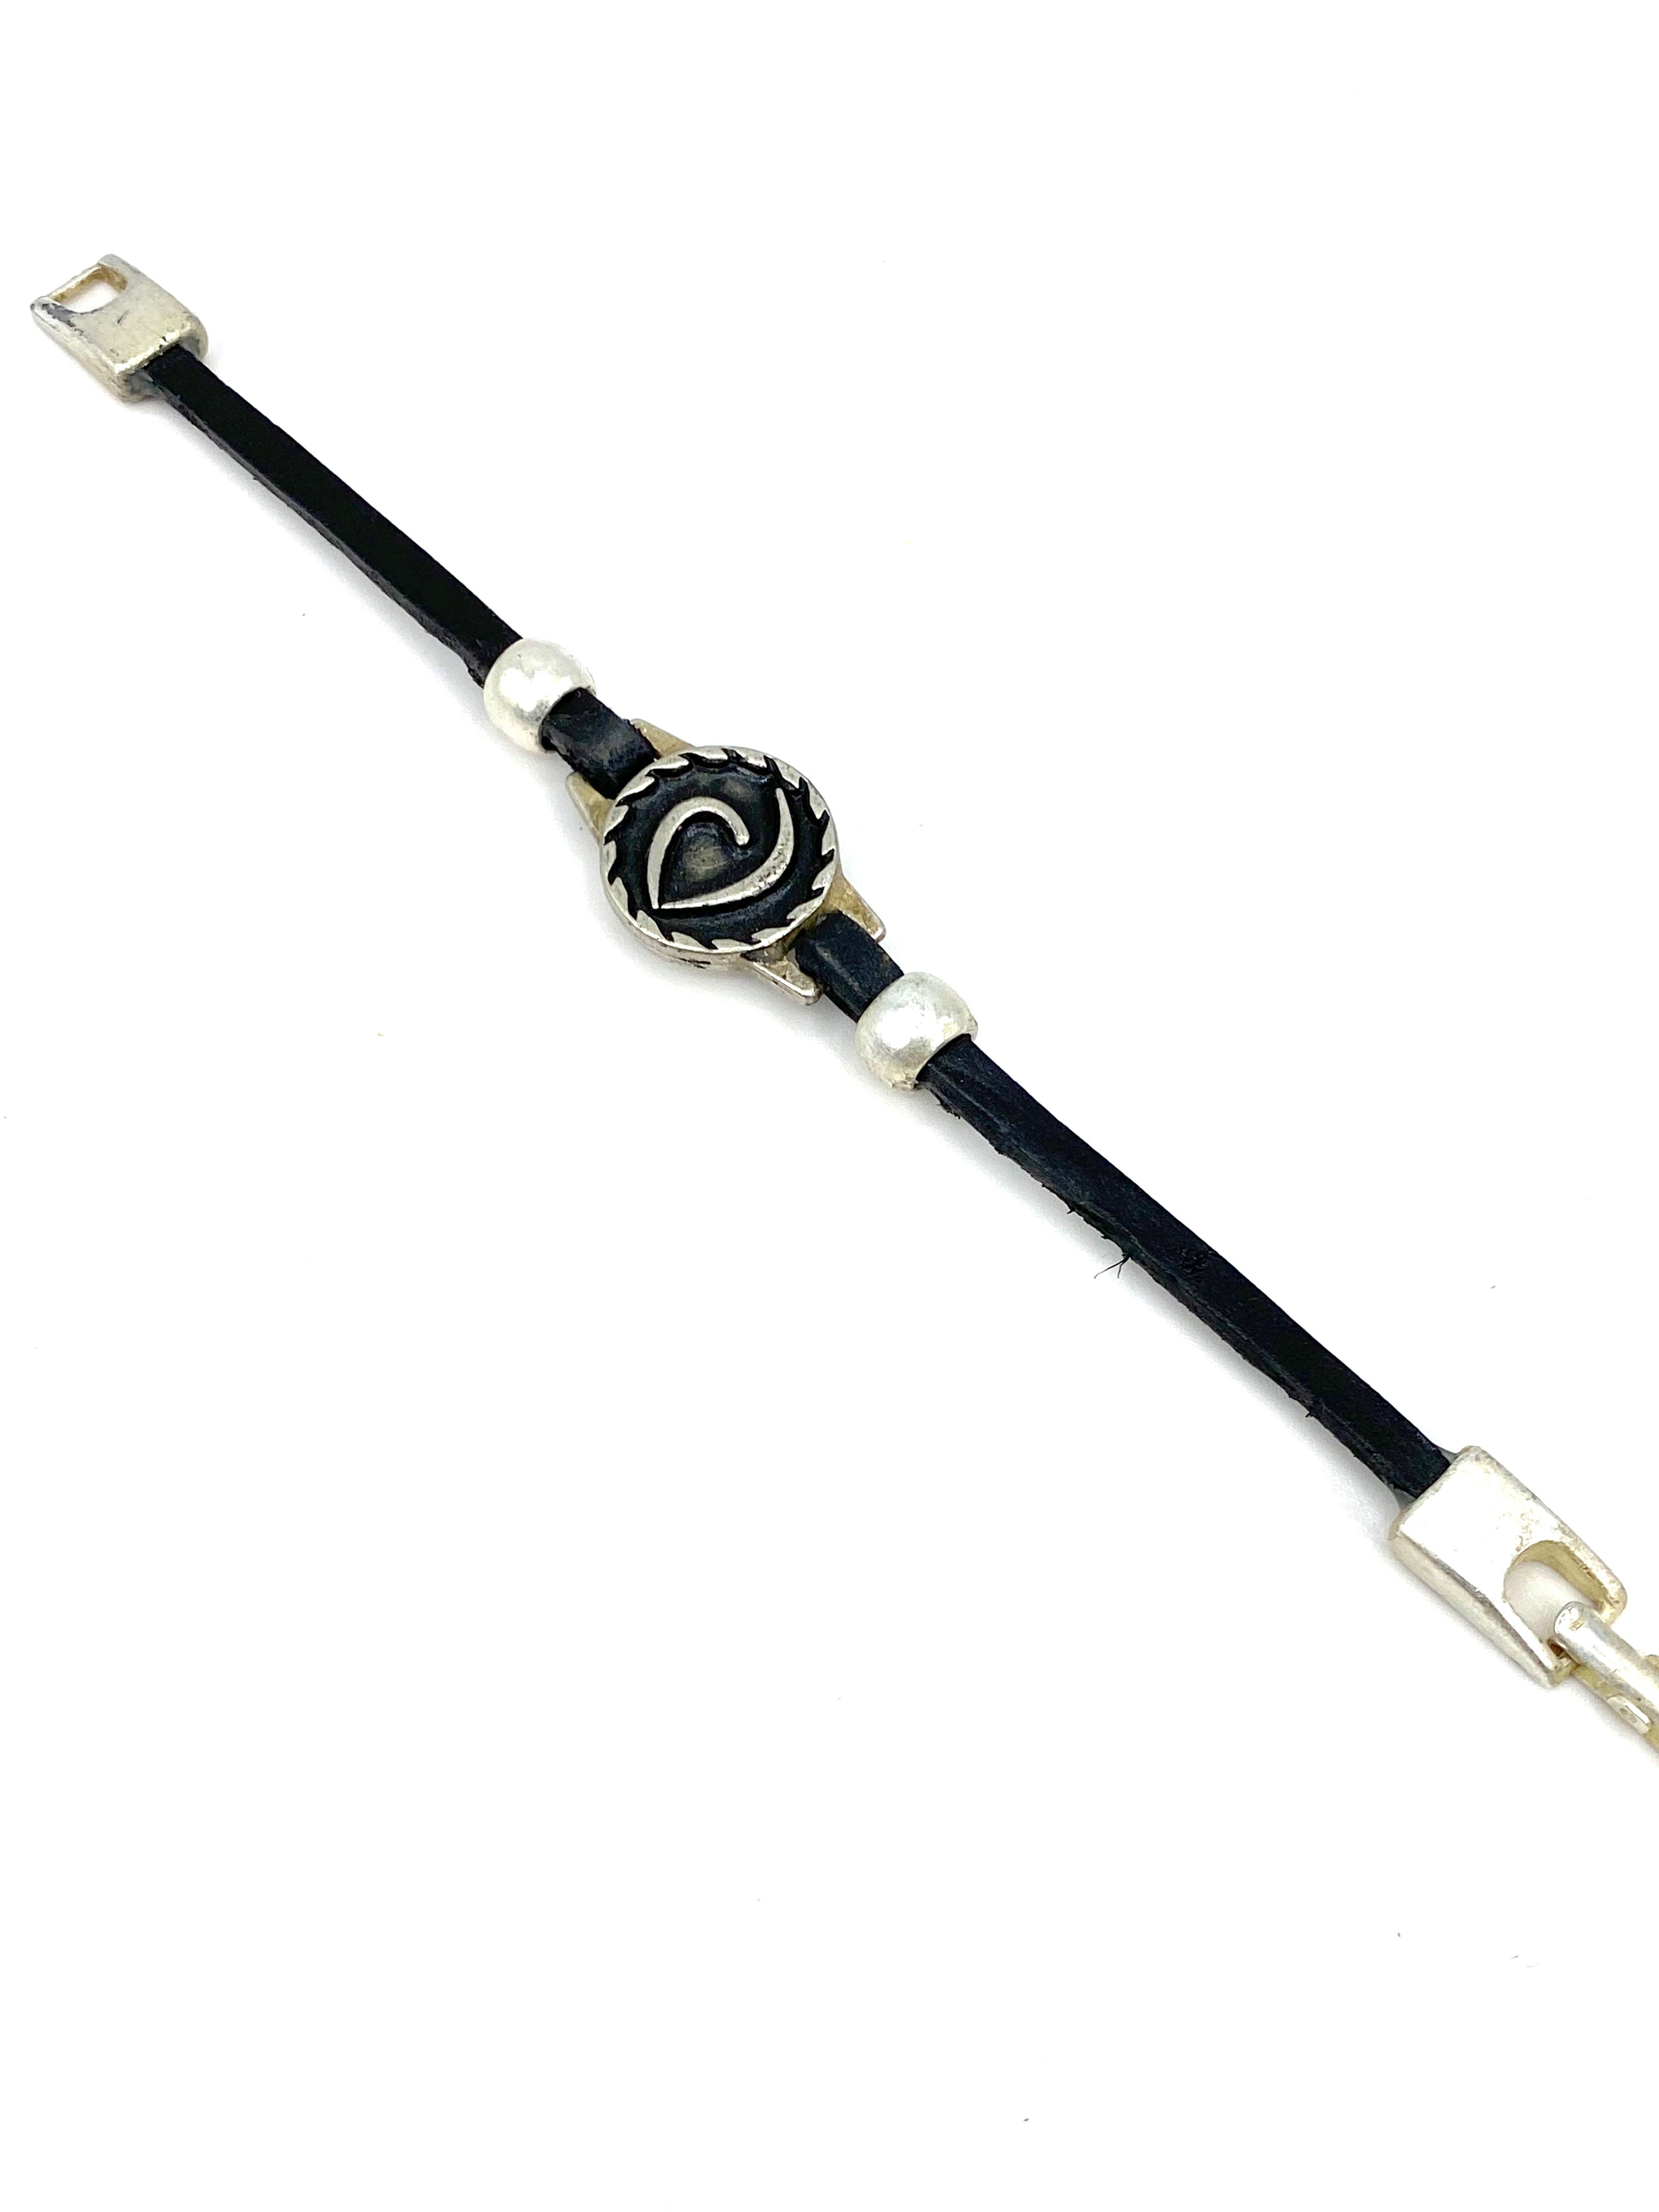 The Heart Vintage Bracelet Handmade jewelry with Genuine Leather Strap by Graciela's Collection